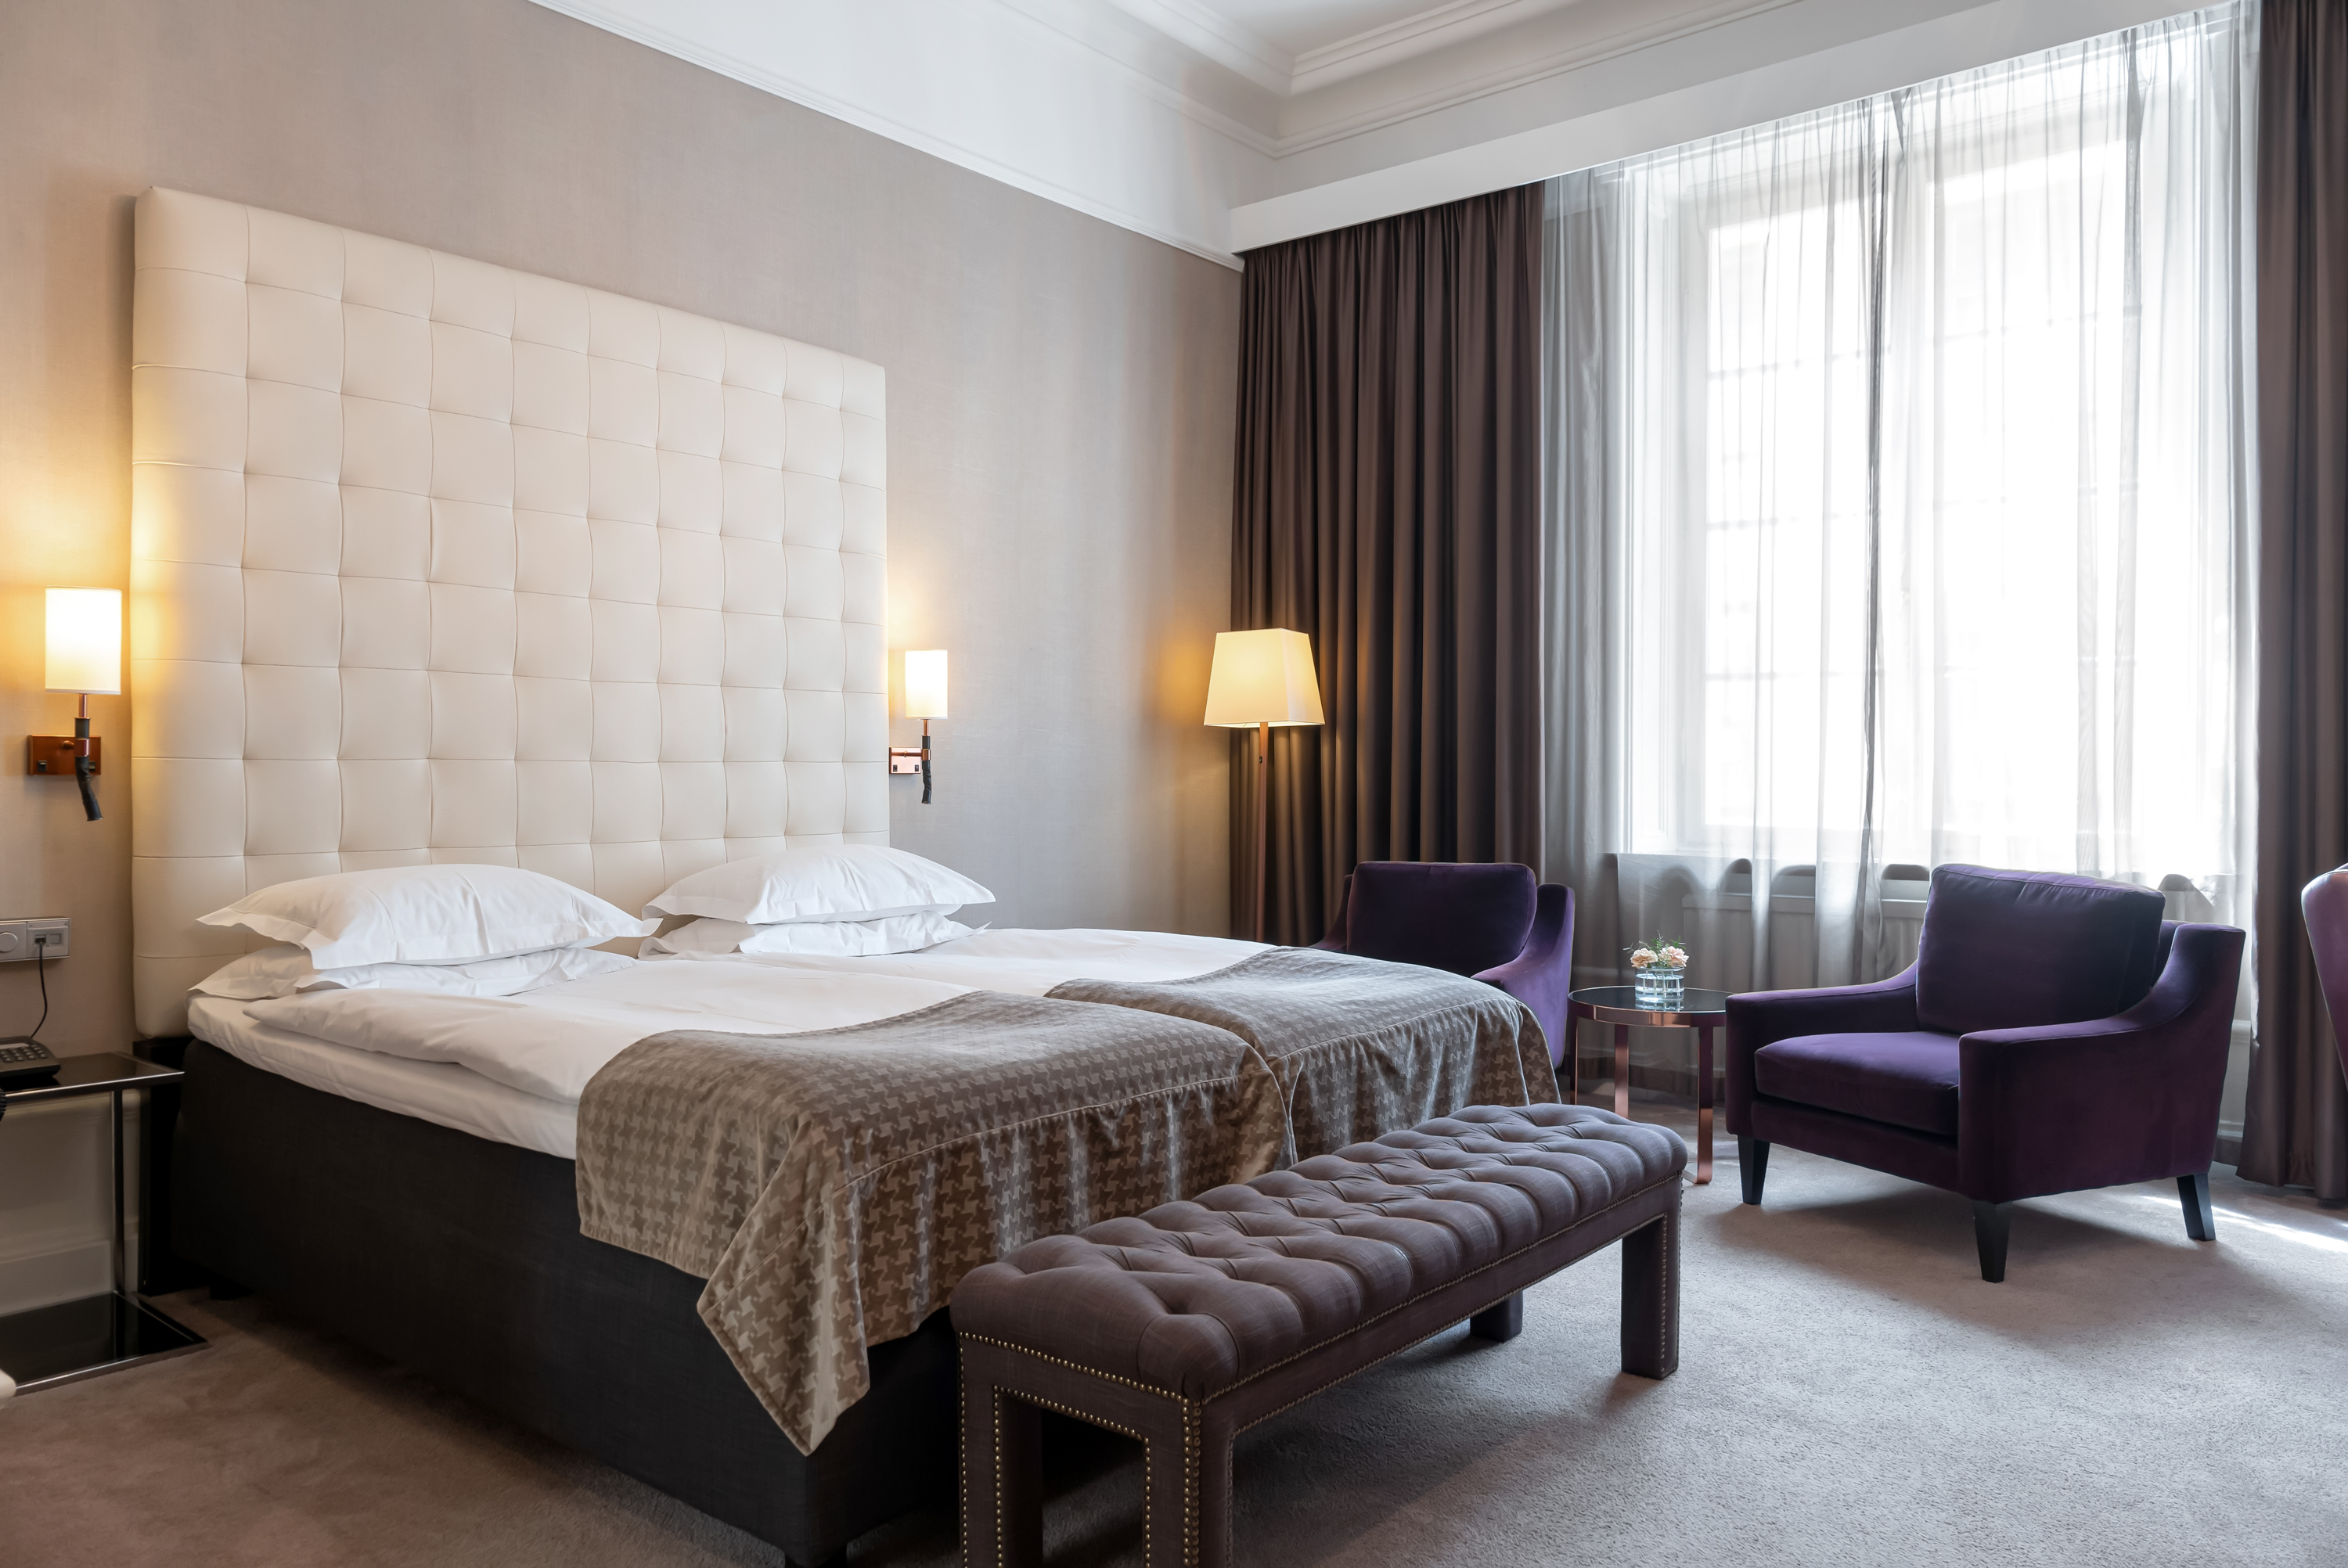 Hotel room with bed, large headboard and purple armchairs